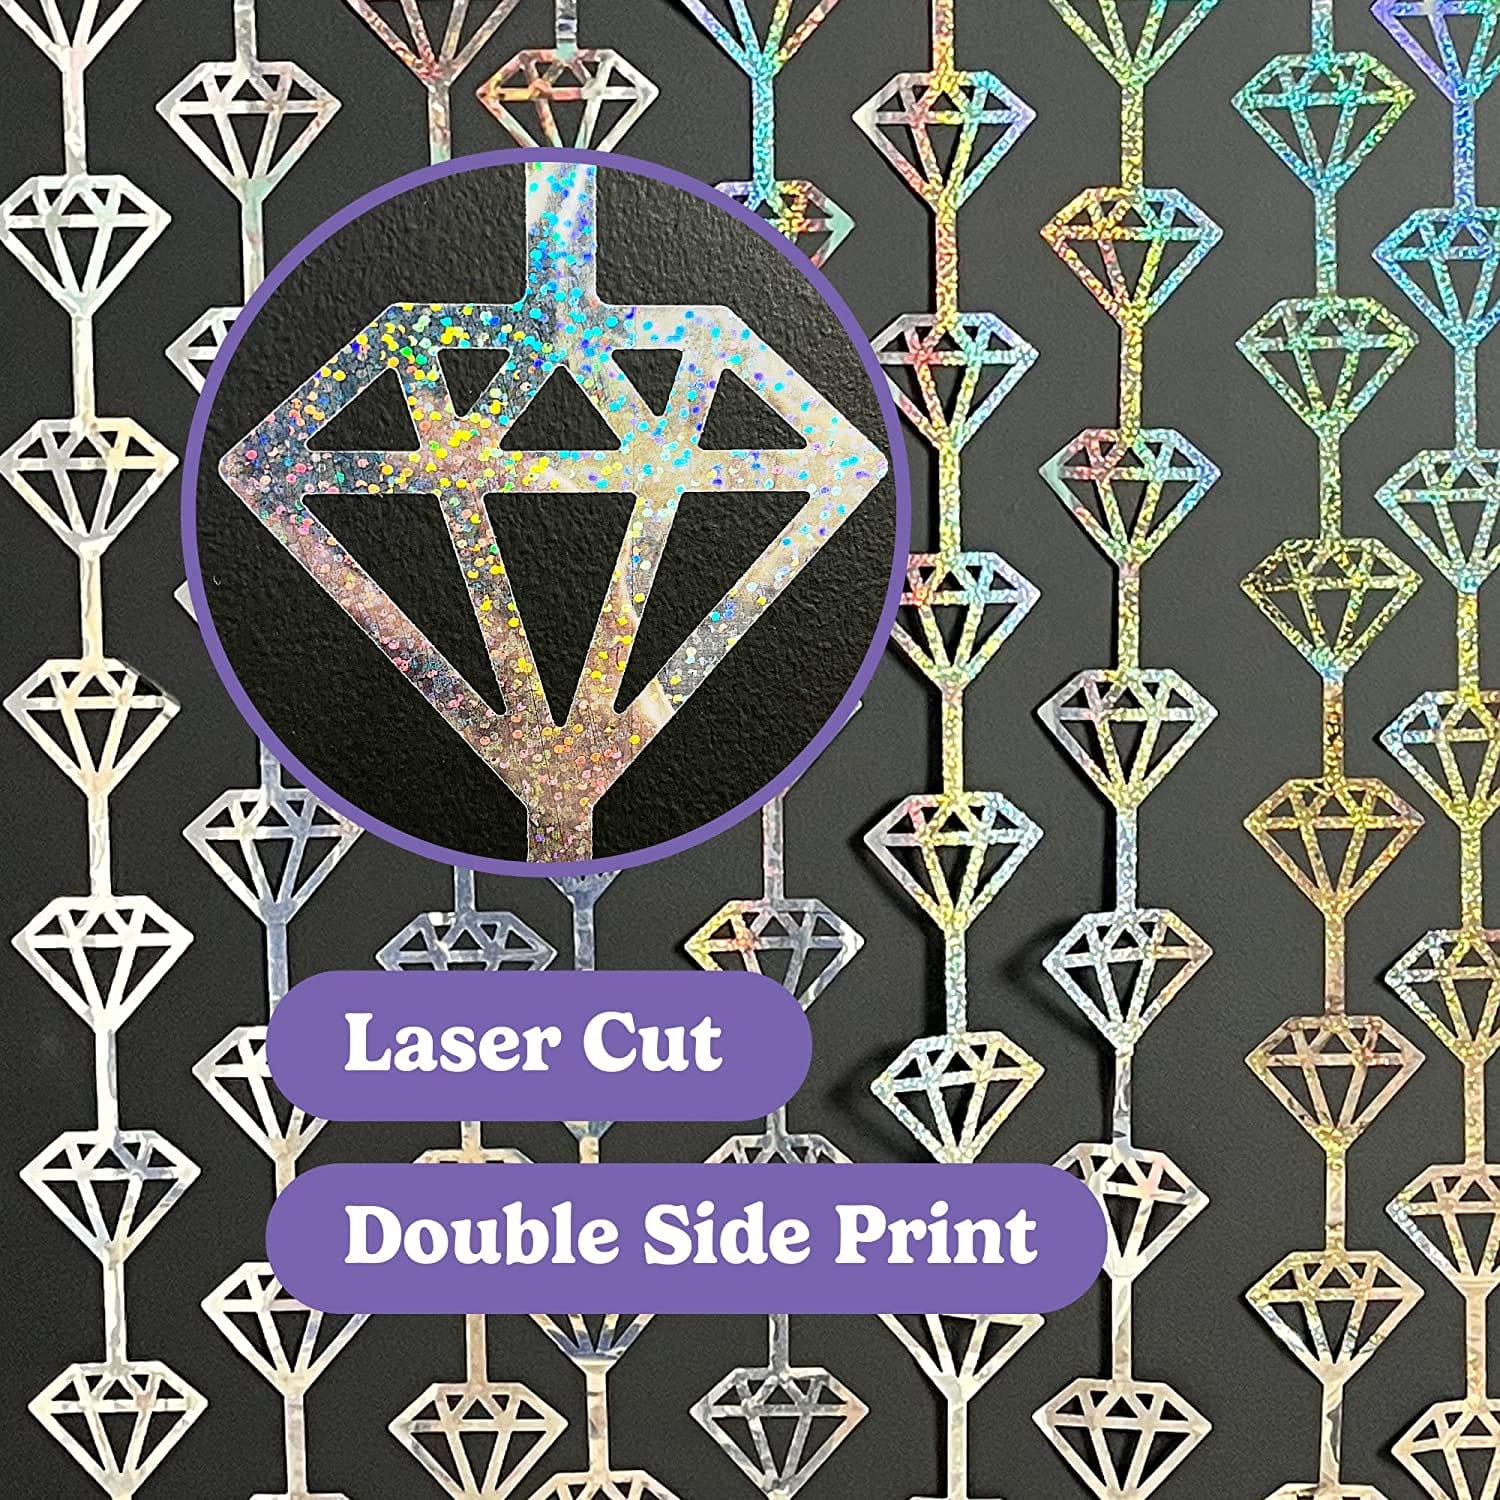 Sliver Diamond Foil Curtain with laser cut and double side print